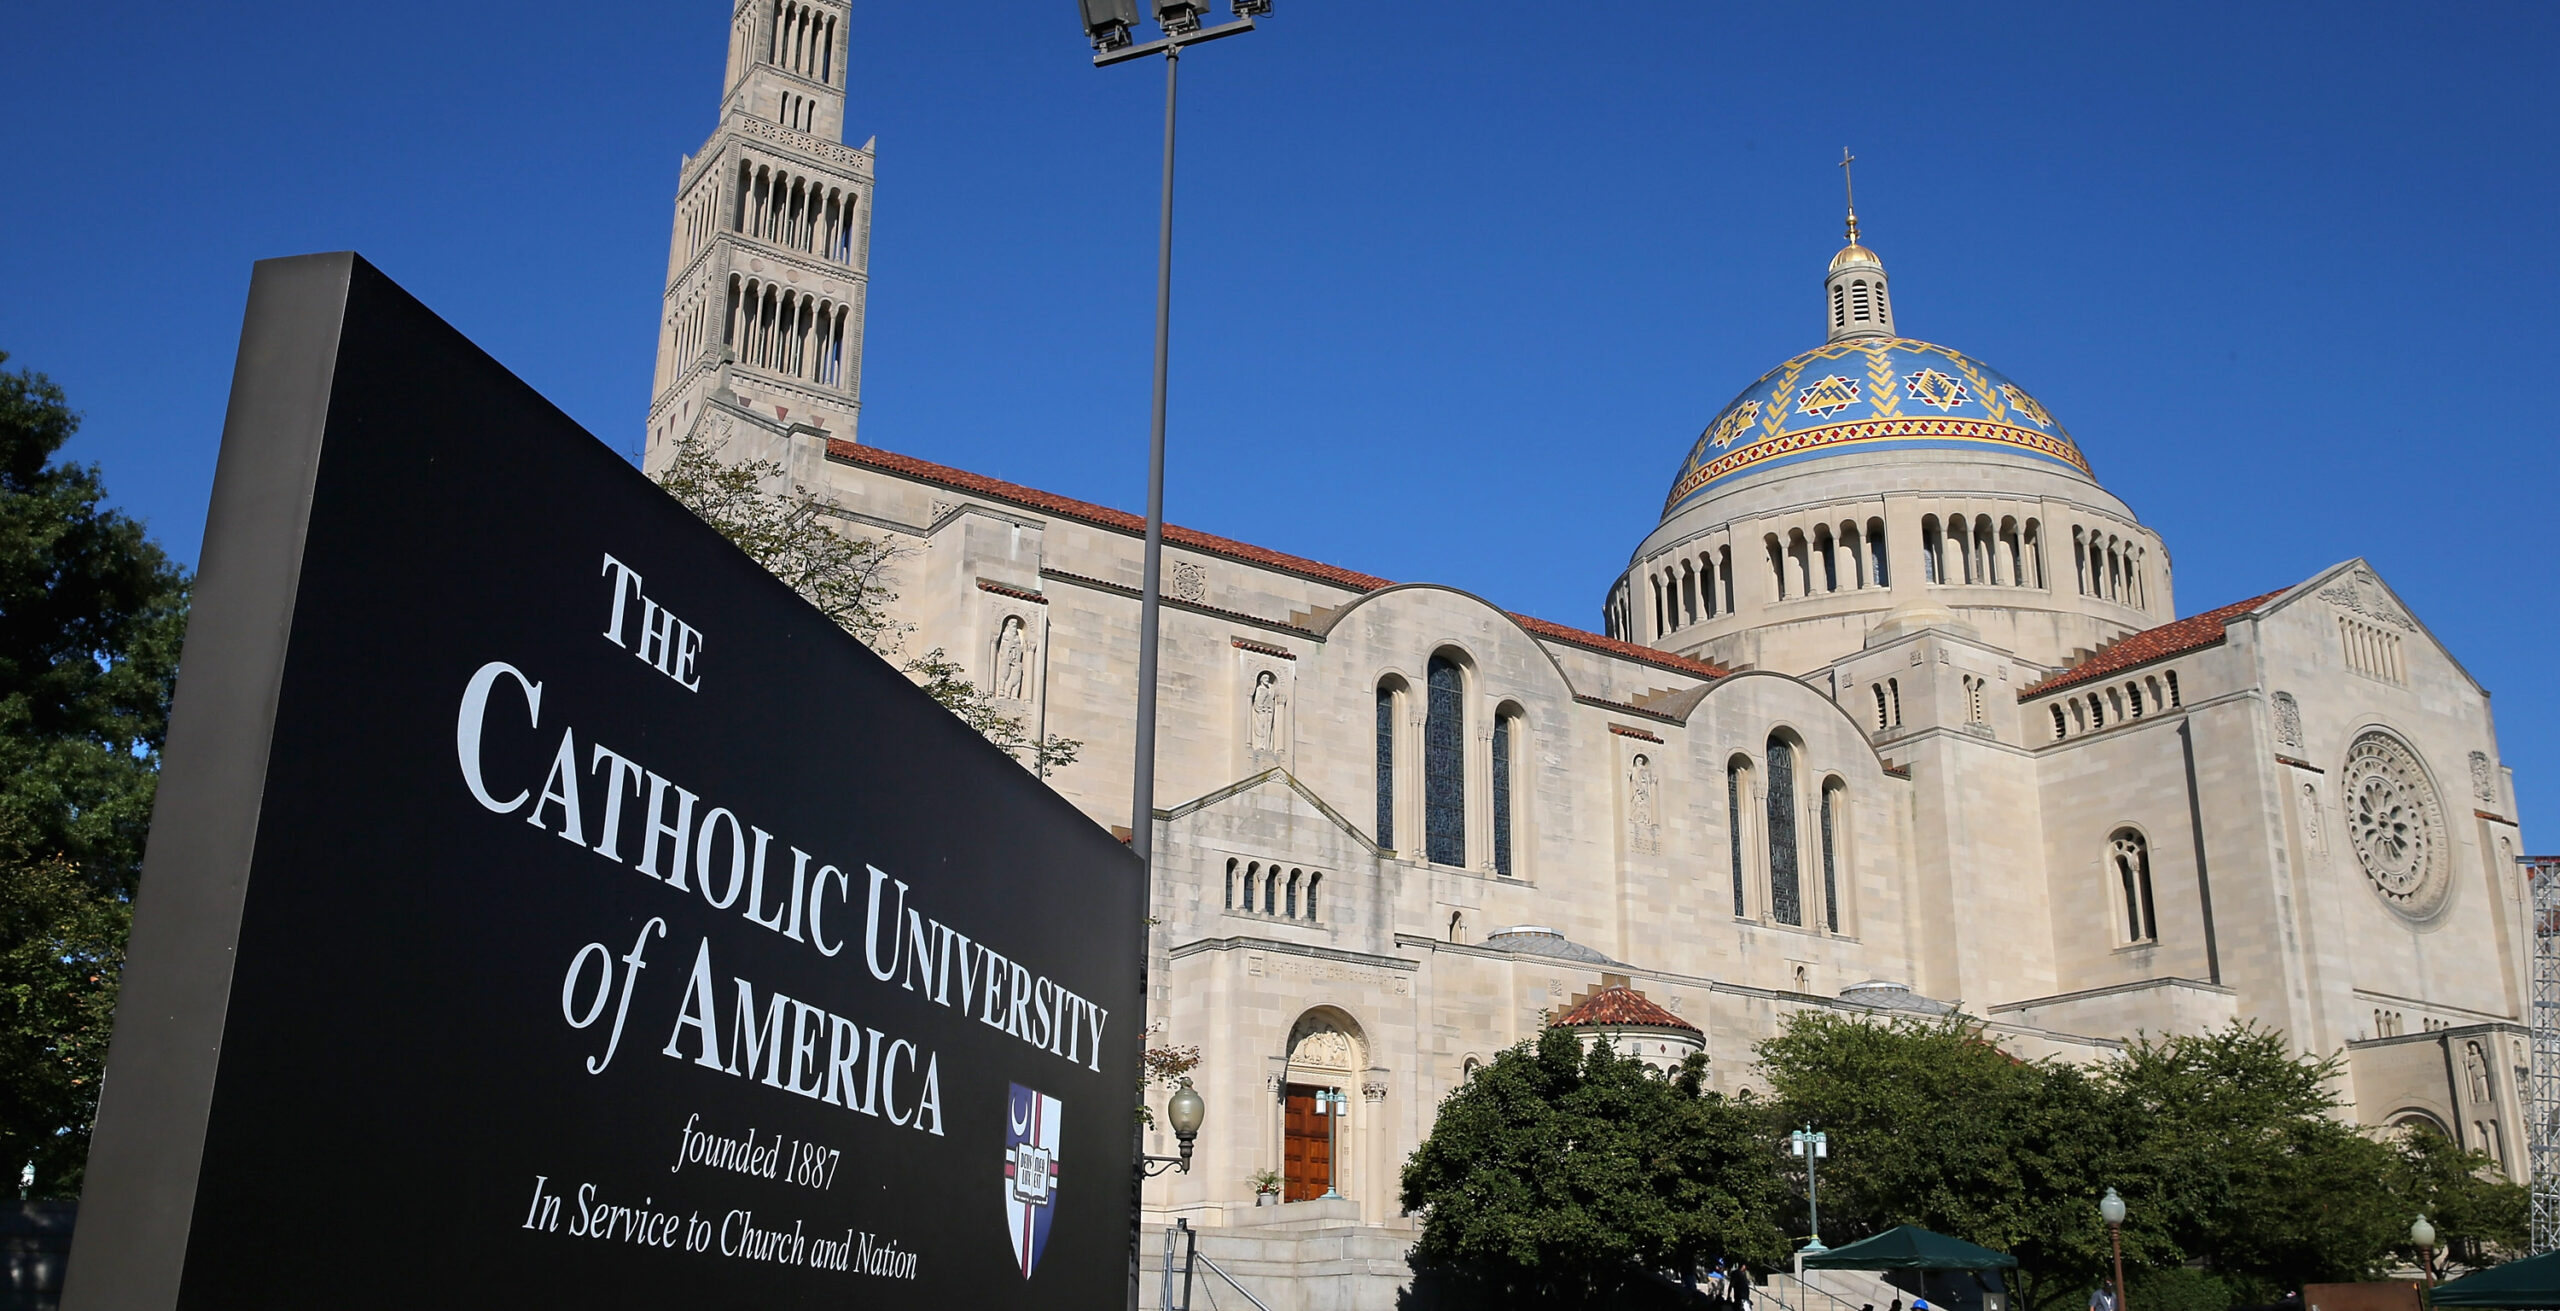 Faithful Catholic Colleges See 'Unprecedented' Enrollment Numbers, Financial Support